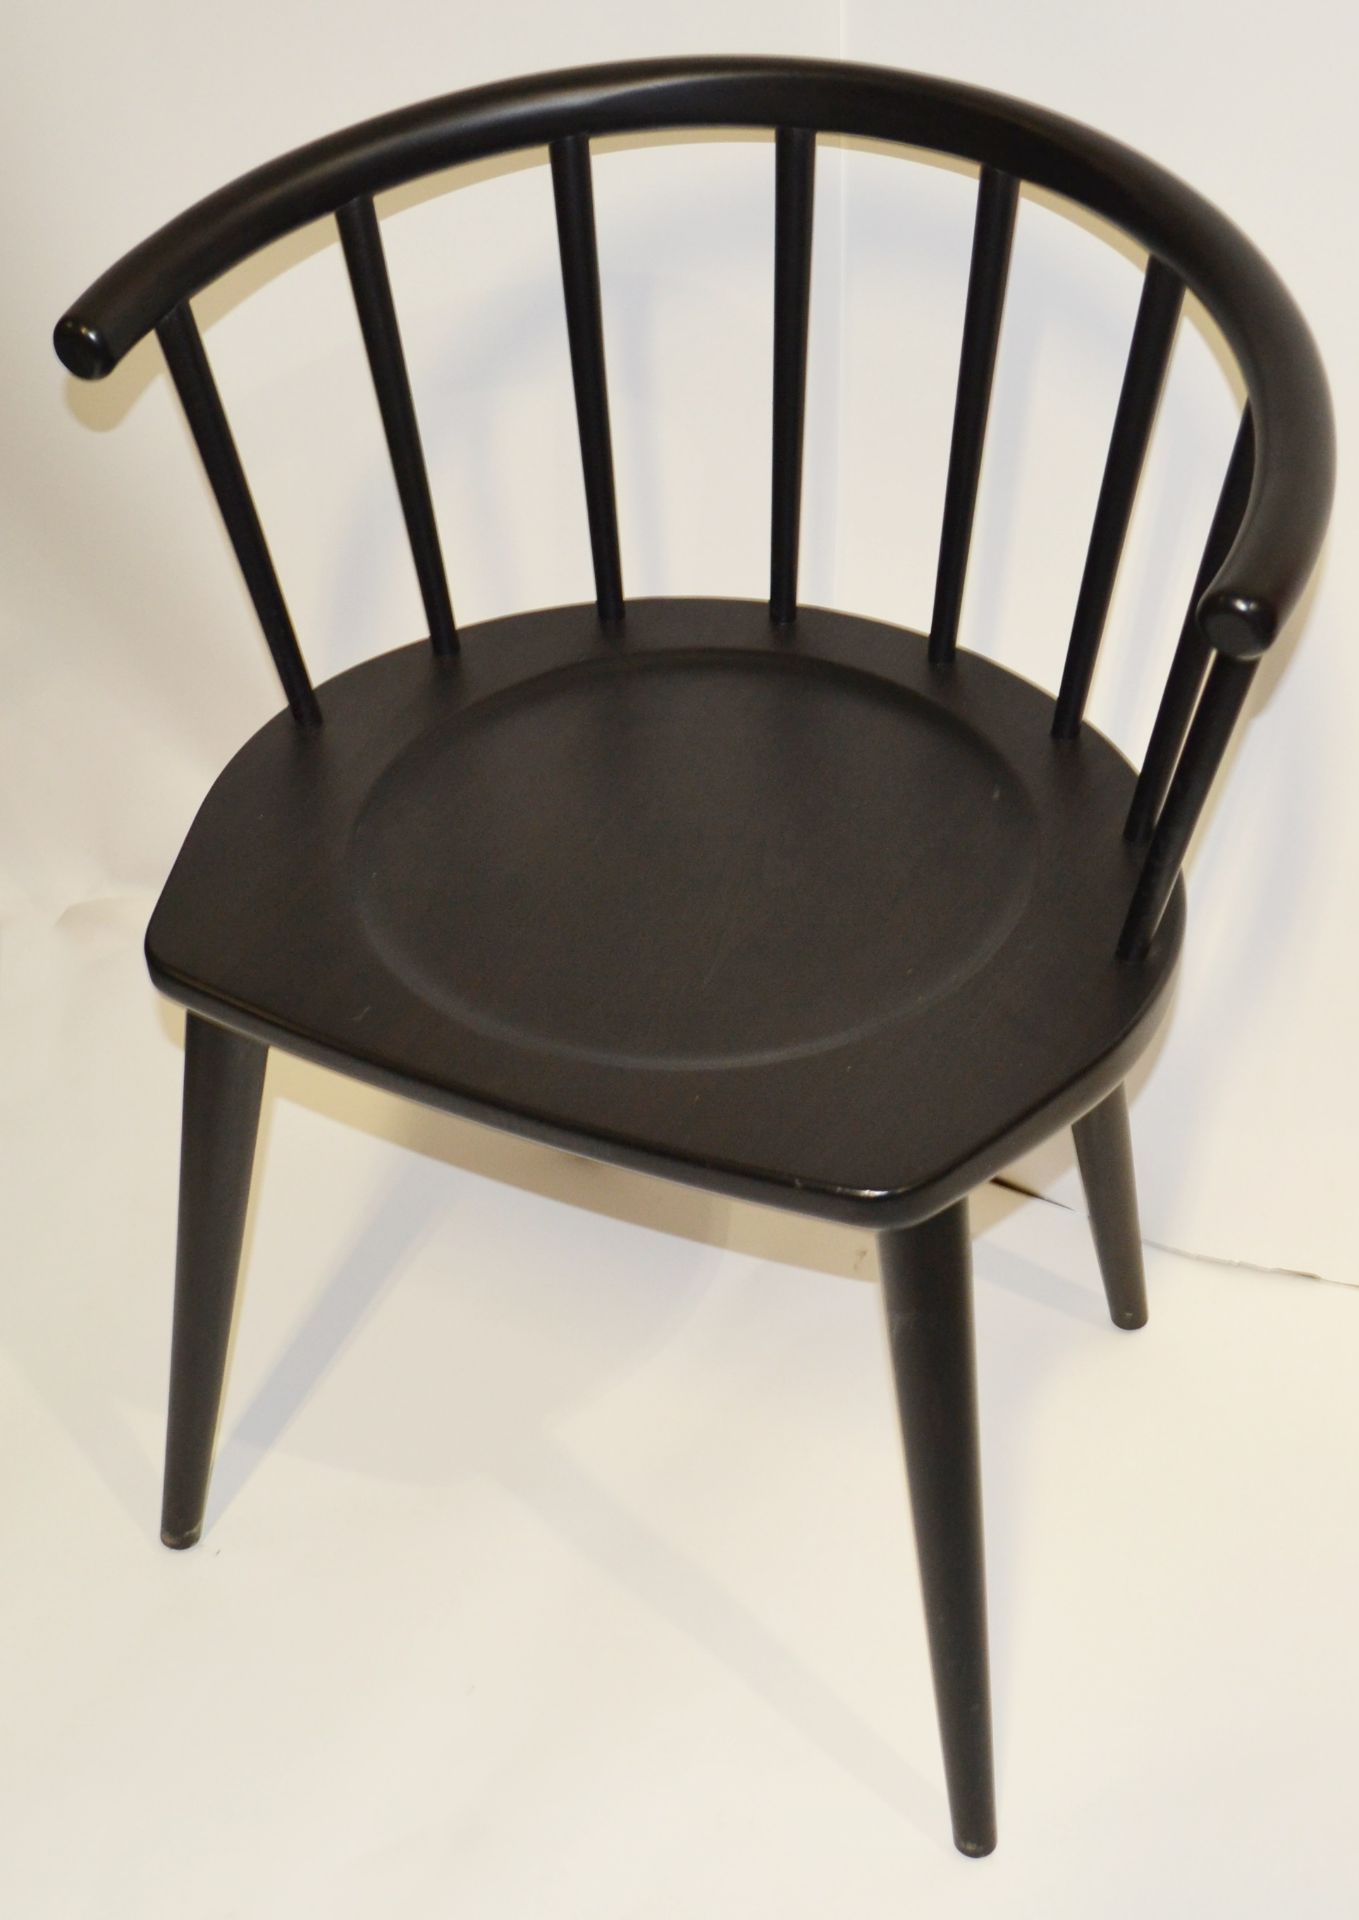 4 x Curved Spindleback Wooden Dining Chairs With Shaped Seats and Dark Finish - Dimensions: H73 x